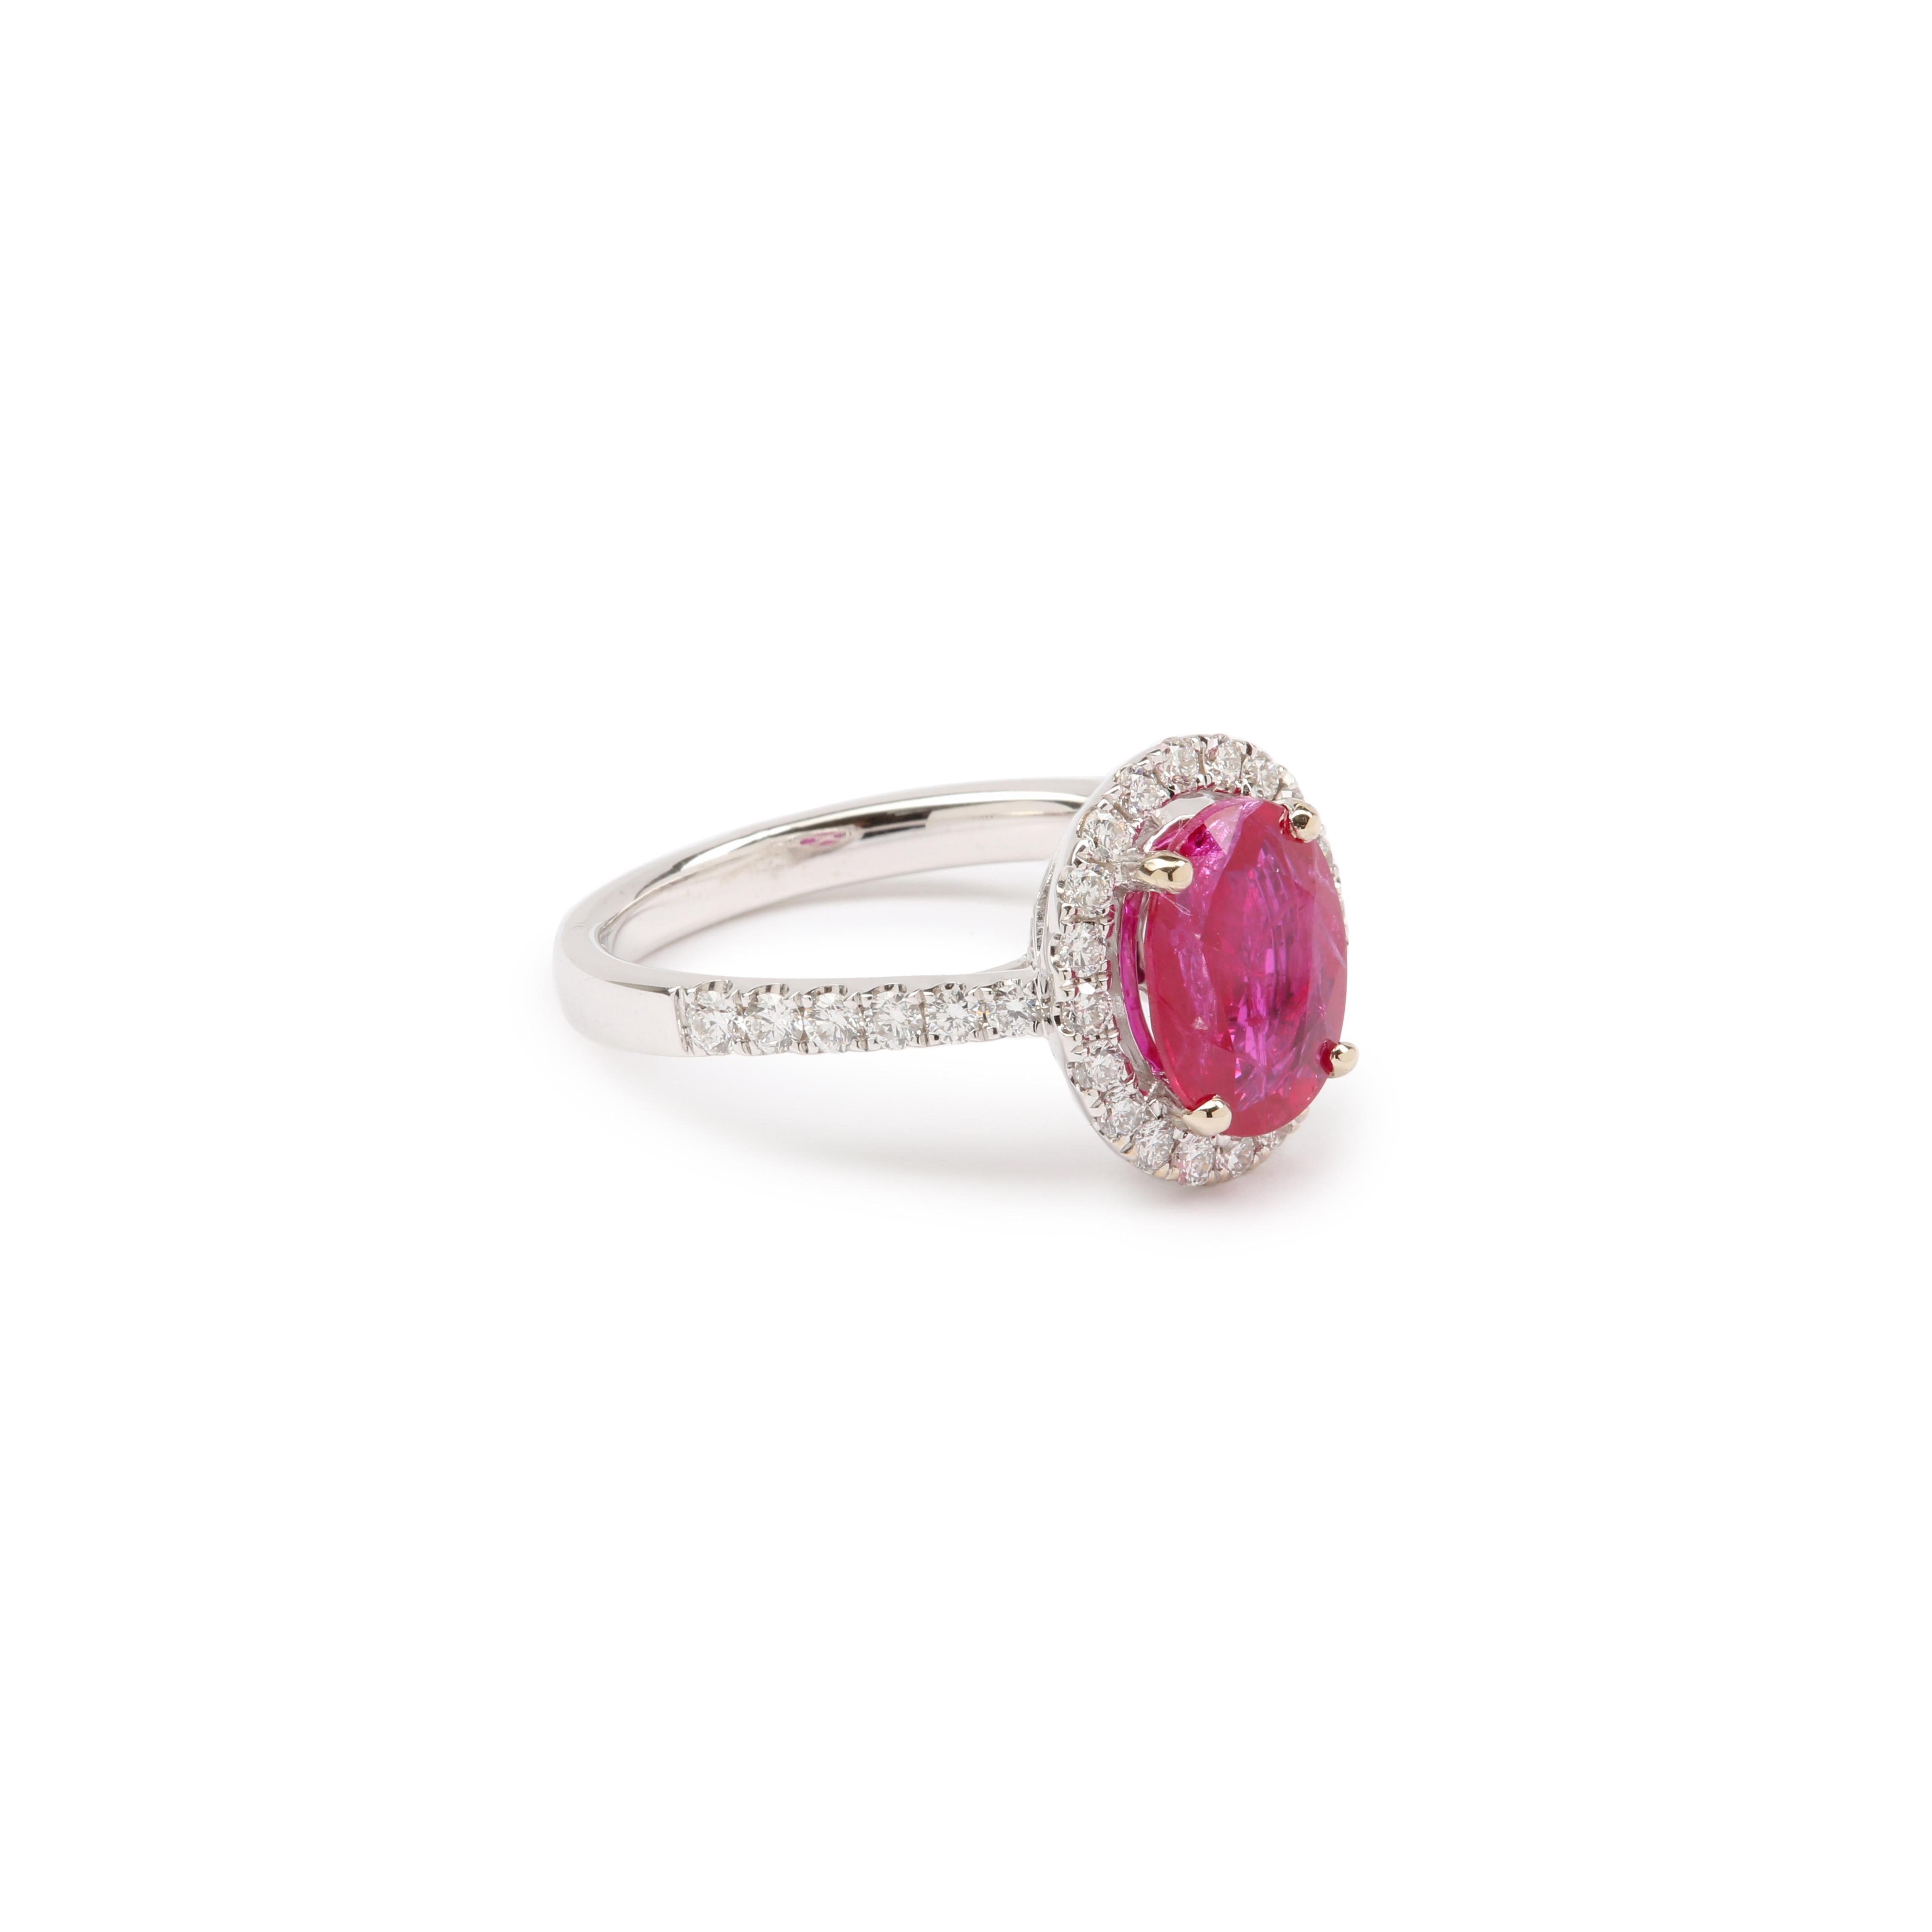 Beautiful ring set with a 1.80 carats Burmese ruby in a brilliant diamond setting.

Weight of the ruby : 1.80 carats

With Gem Paris certificate, specifying natural ruby, origin Burma.

Natural stones may have some characteristic inclusions, among